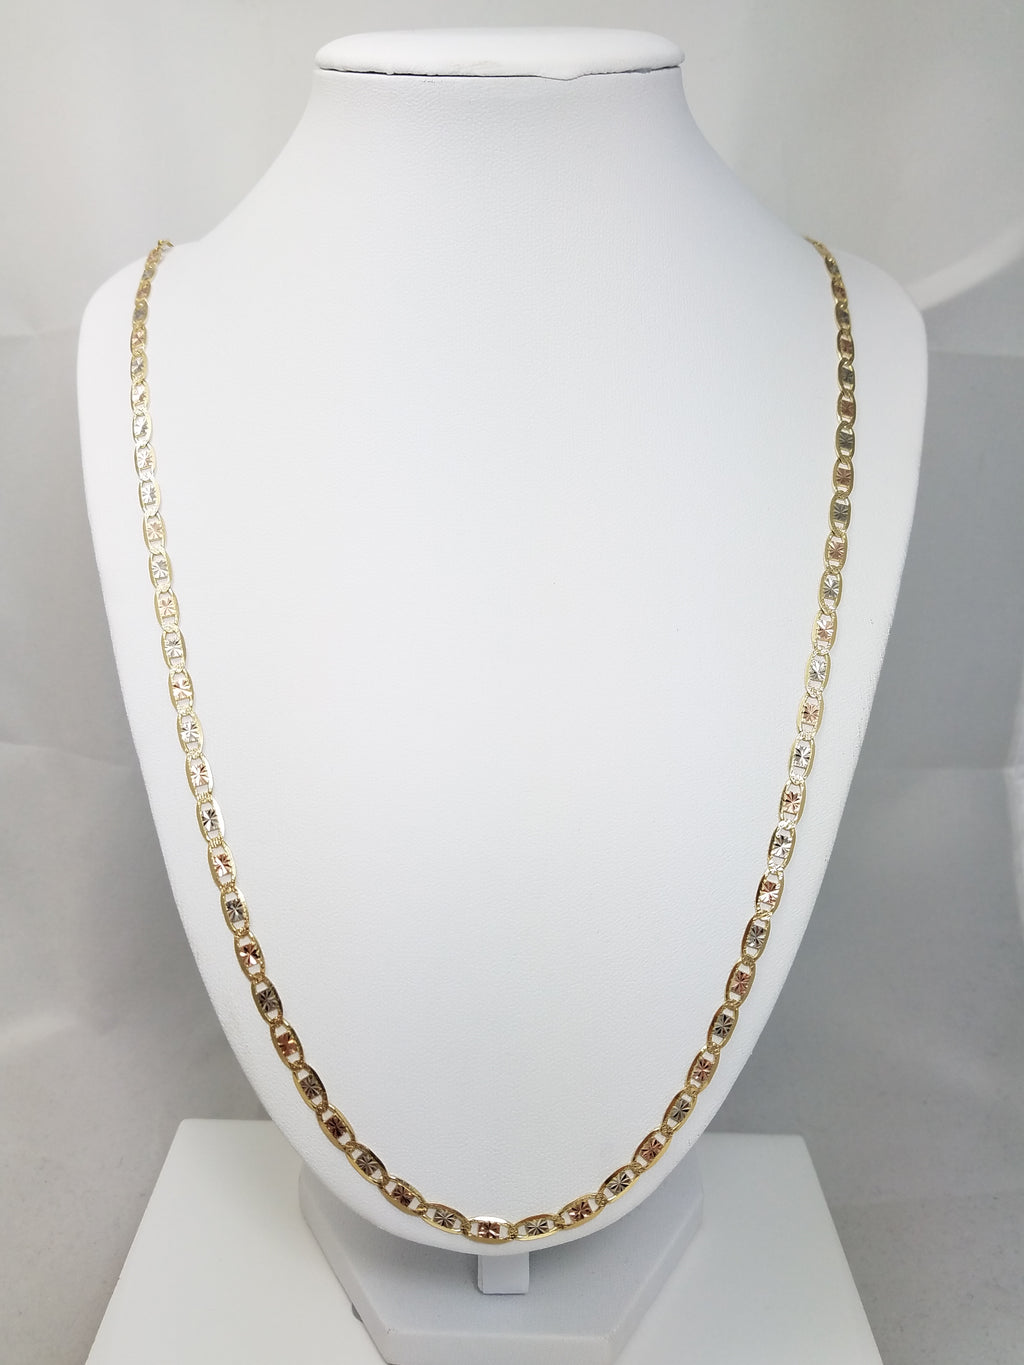 26" 14k Solid Tricolor Gold Fancy Link Chain Necklace